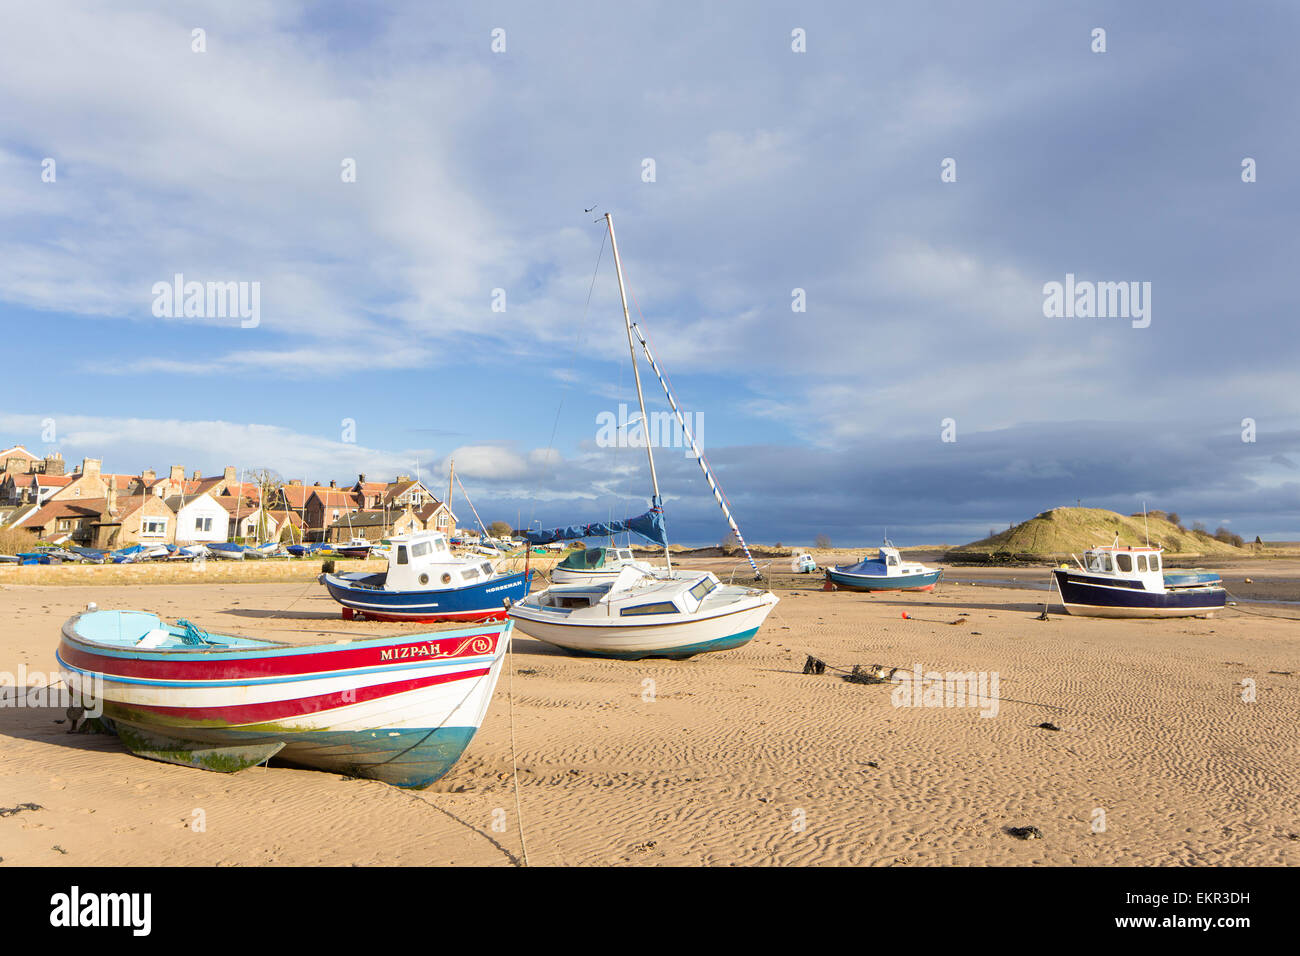 Sailing boats in Alnmouth harbour, Northumberland, England, UK Stock Photo